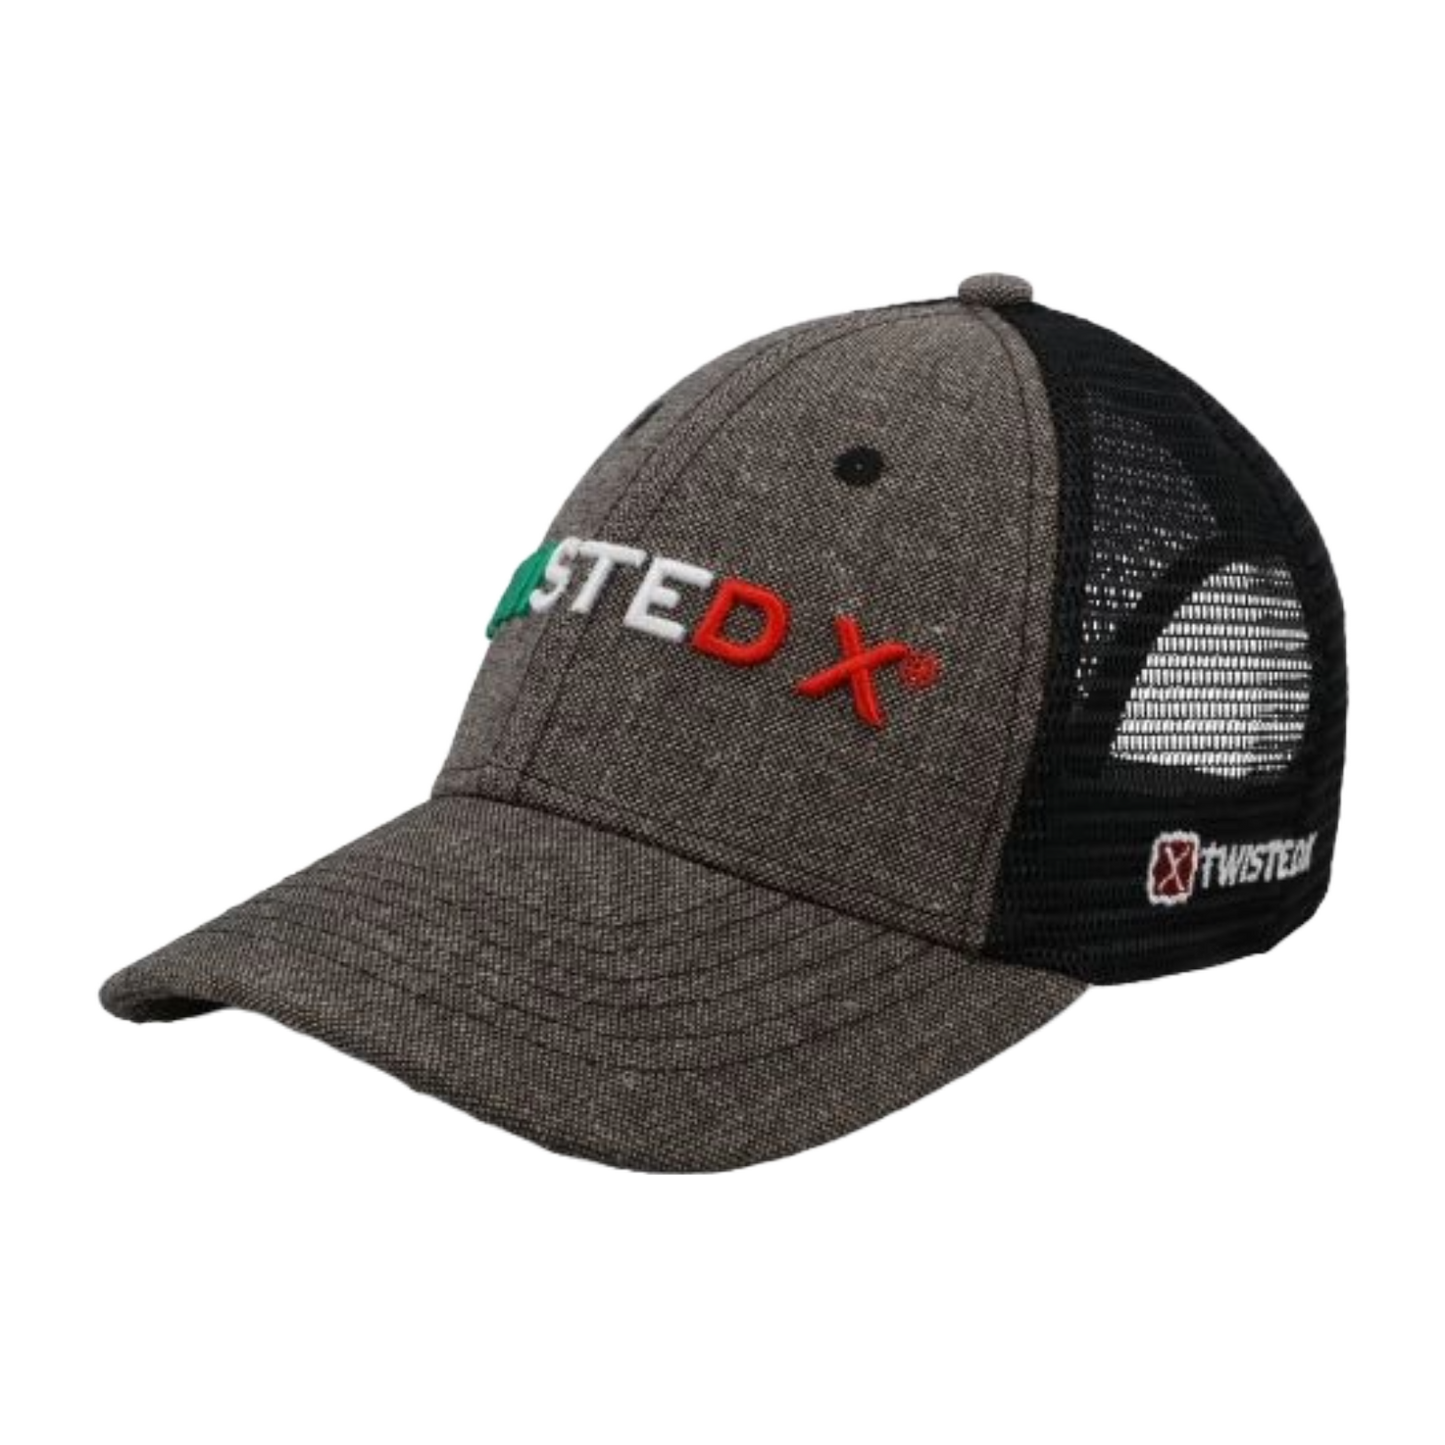 Twisted X Mexican Heritage Charcoal Grey Trucker Cap CAP0006